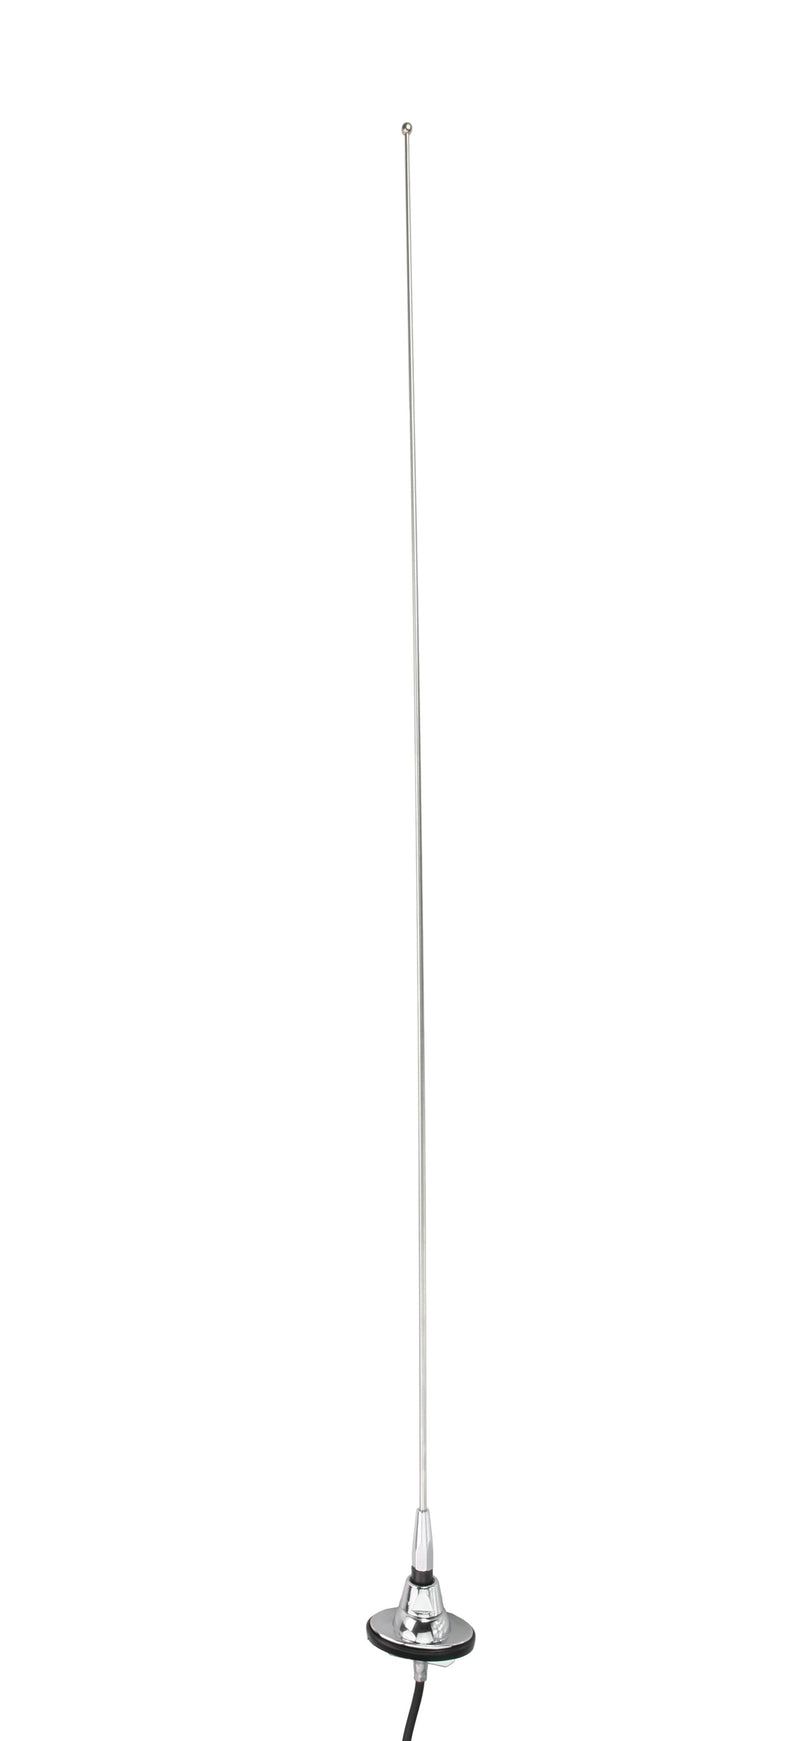 1985-94 Ford Tempo Replacement Antenna